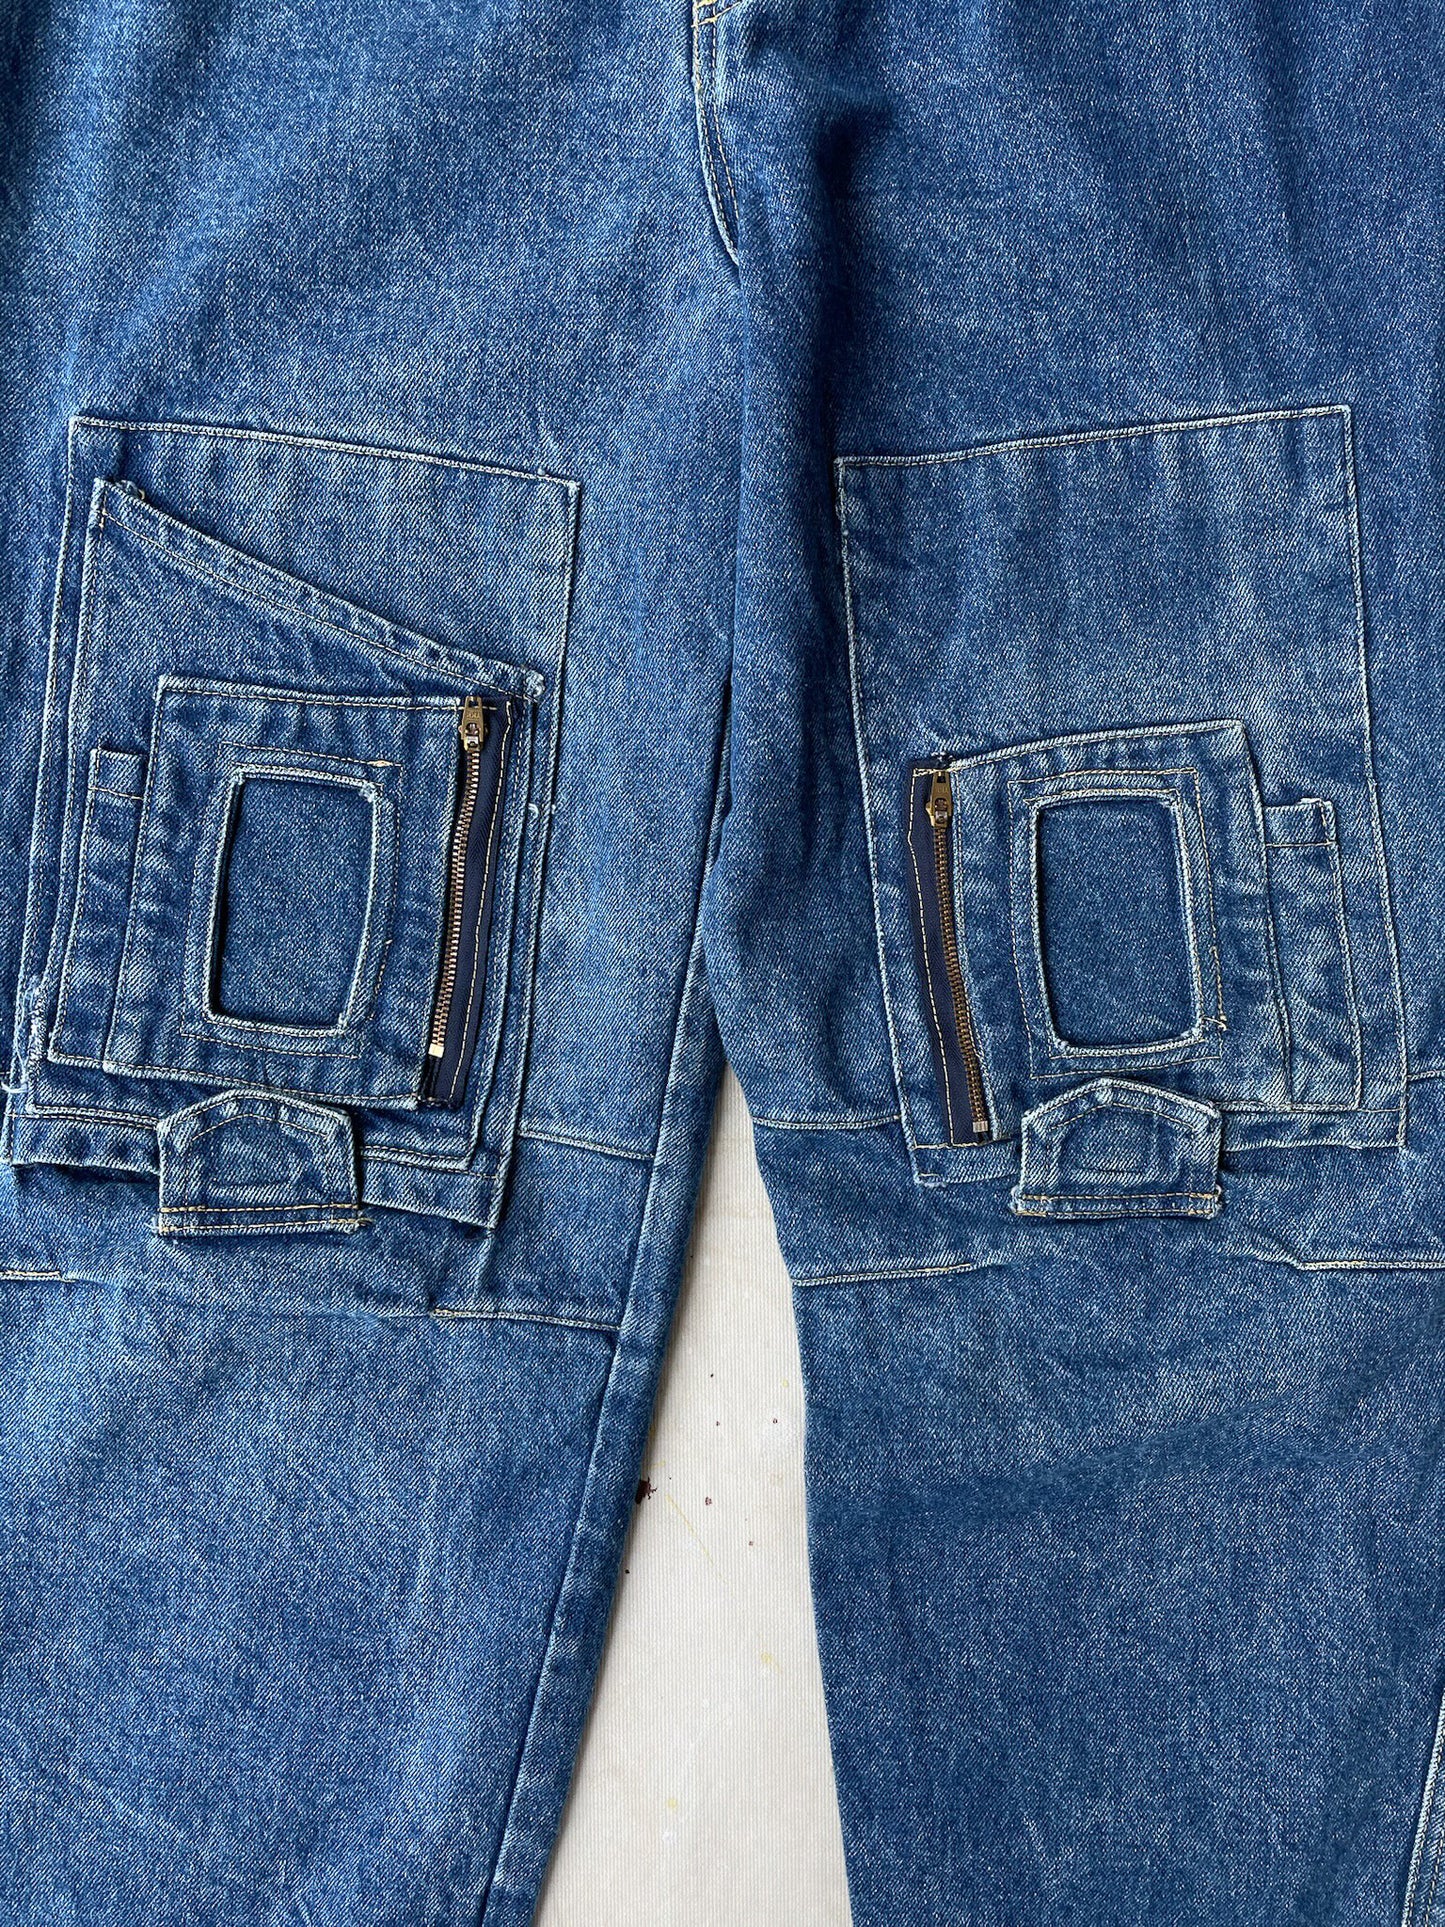 80's Guess Multi Pocket Jeans—[33x31]